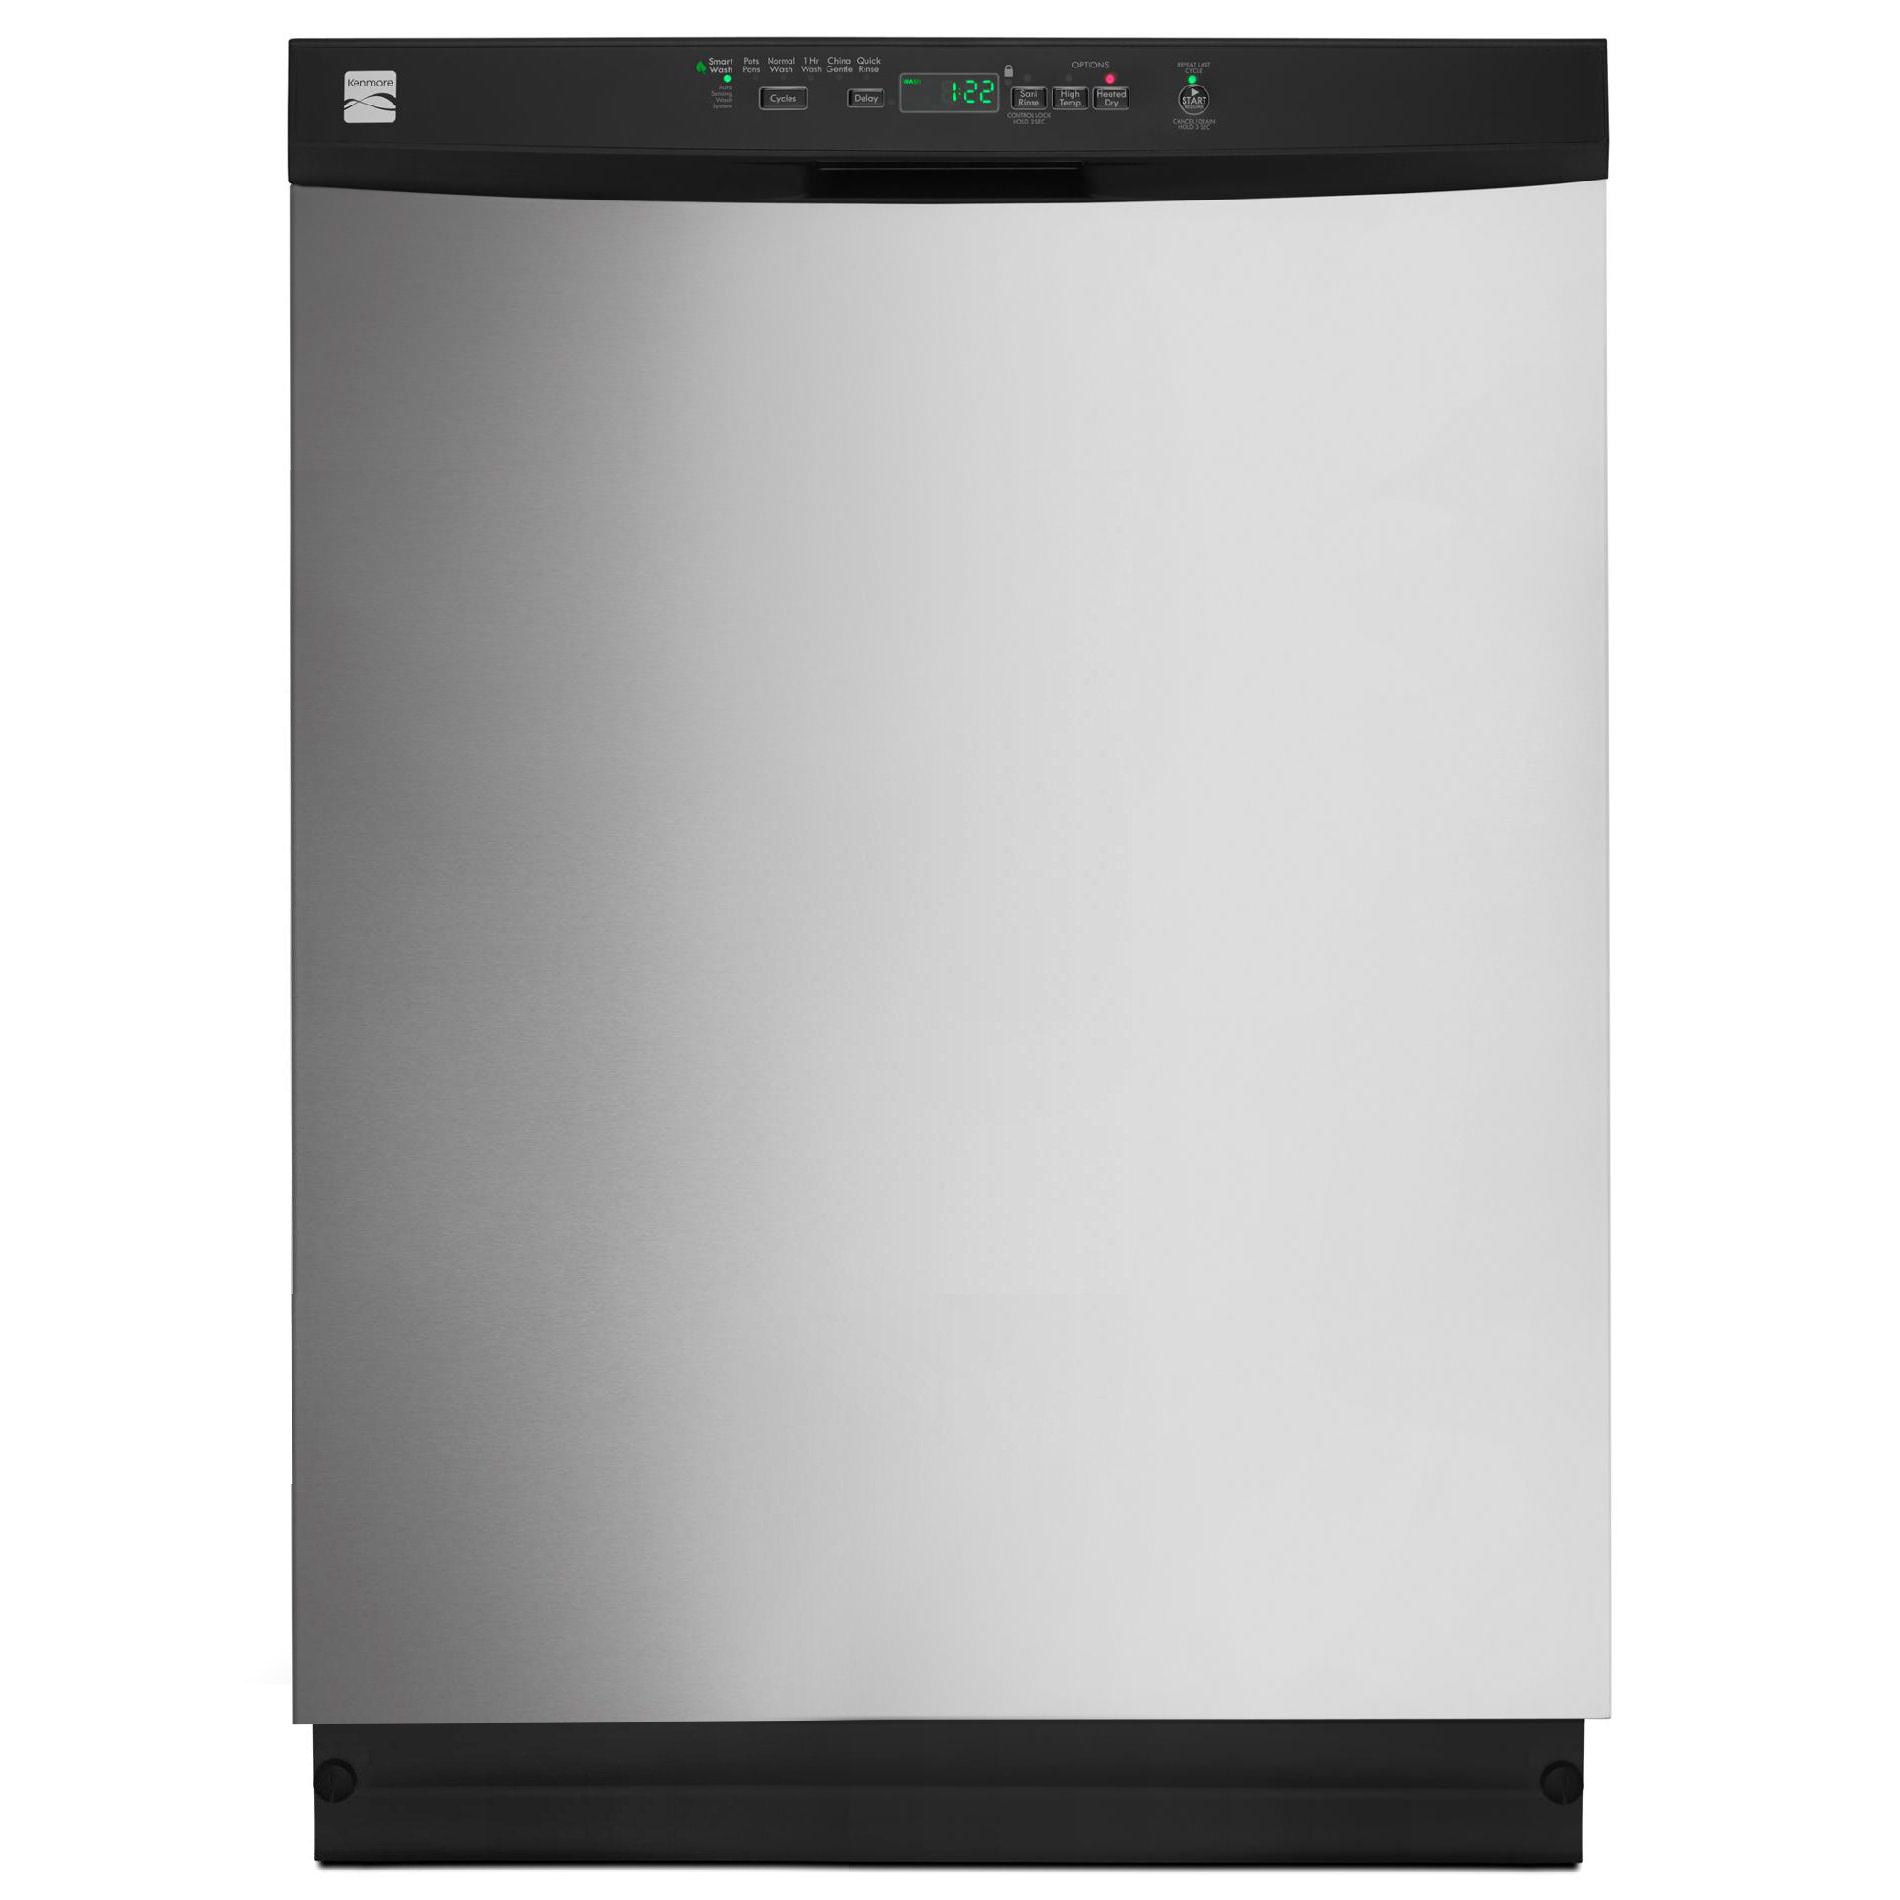 Kenmore 13223 Dishwasher with Steel Tub 